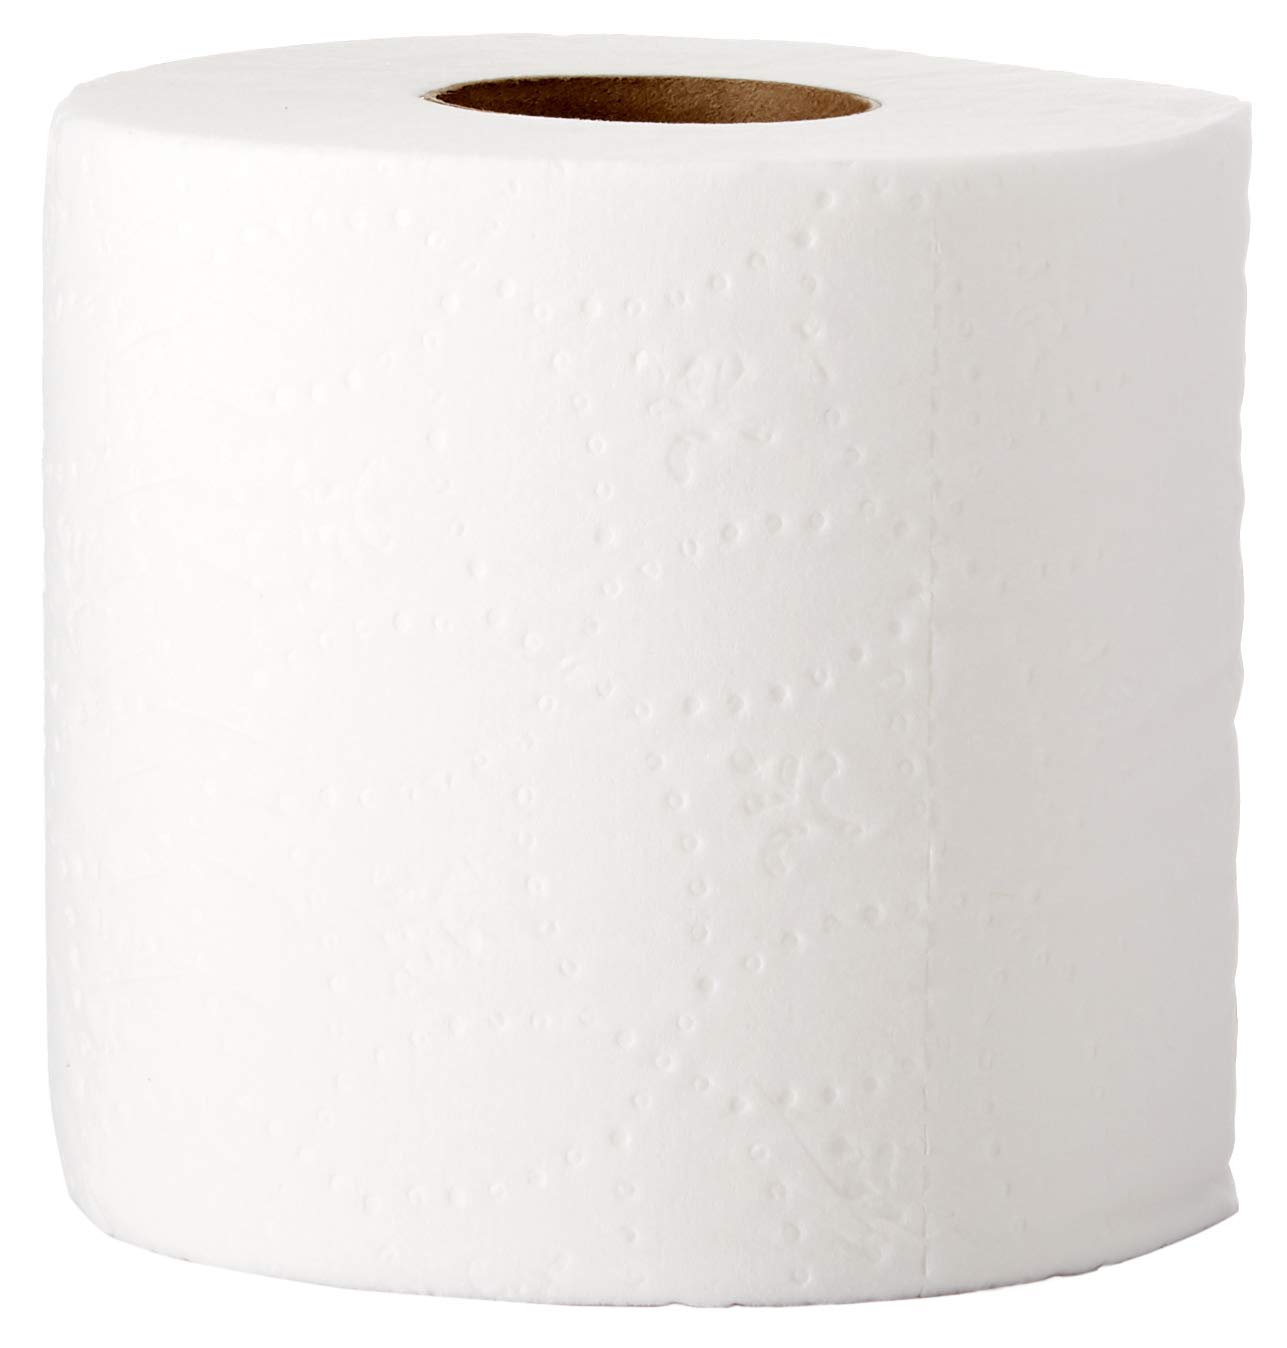 Commercial 2-Ply White Ultra Plus Individually Wrapped Toilet  Paper/Bath Tissue, Bulk, Septic Safe, FSC Certified